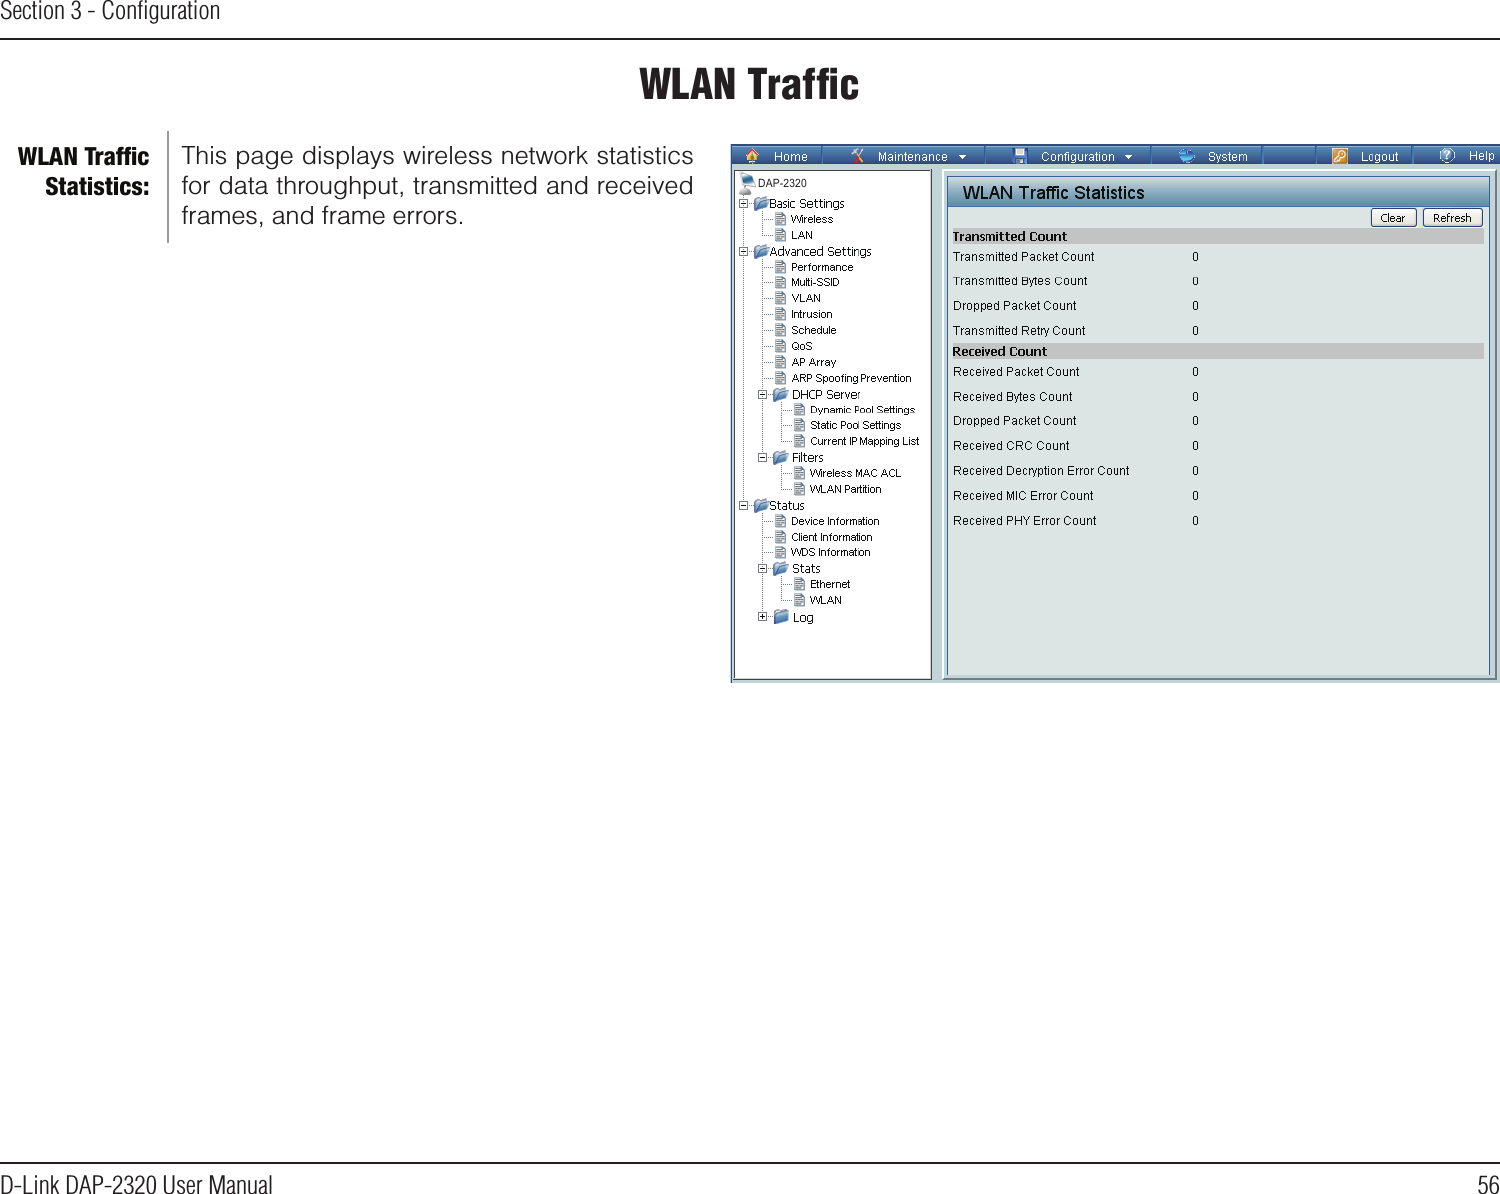 56D-Link DAP-2320 User ManualSection 3 - ConﬁgurationWLAN TrafﬁcThis page displays wireless network statistics for data throughput, transmitted and received frames, and frame errors.WLAN Trafﬁc Statistics:DAP-2320